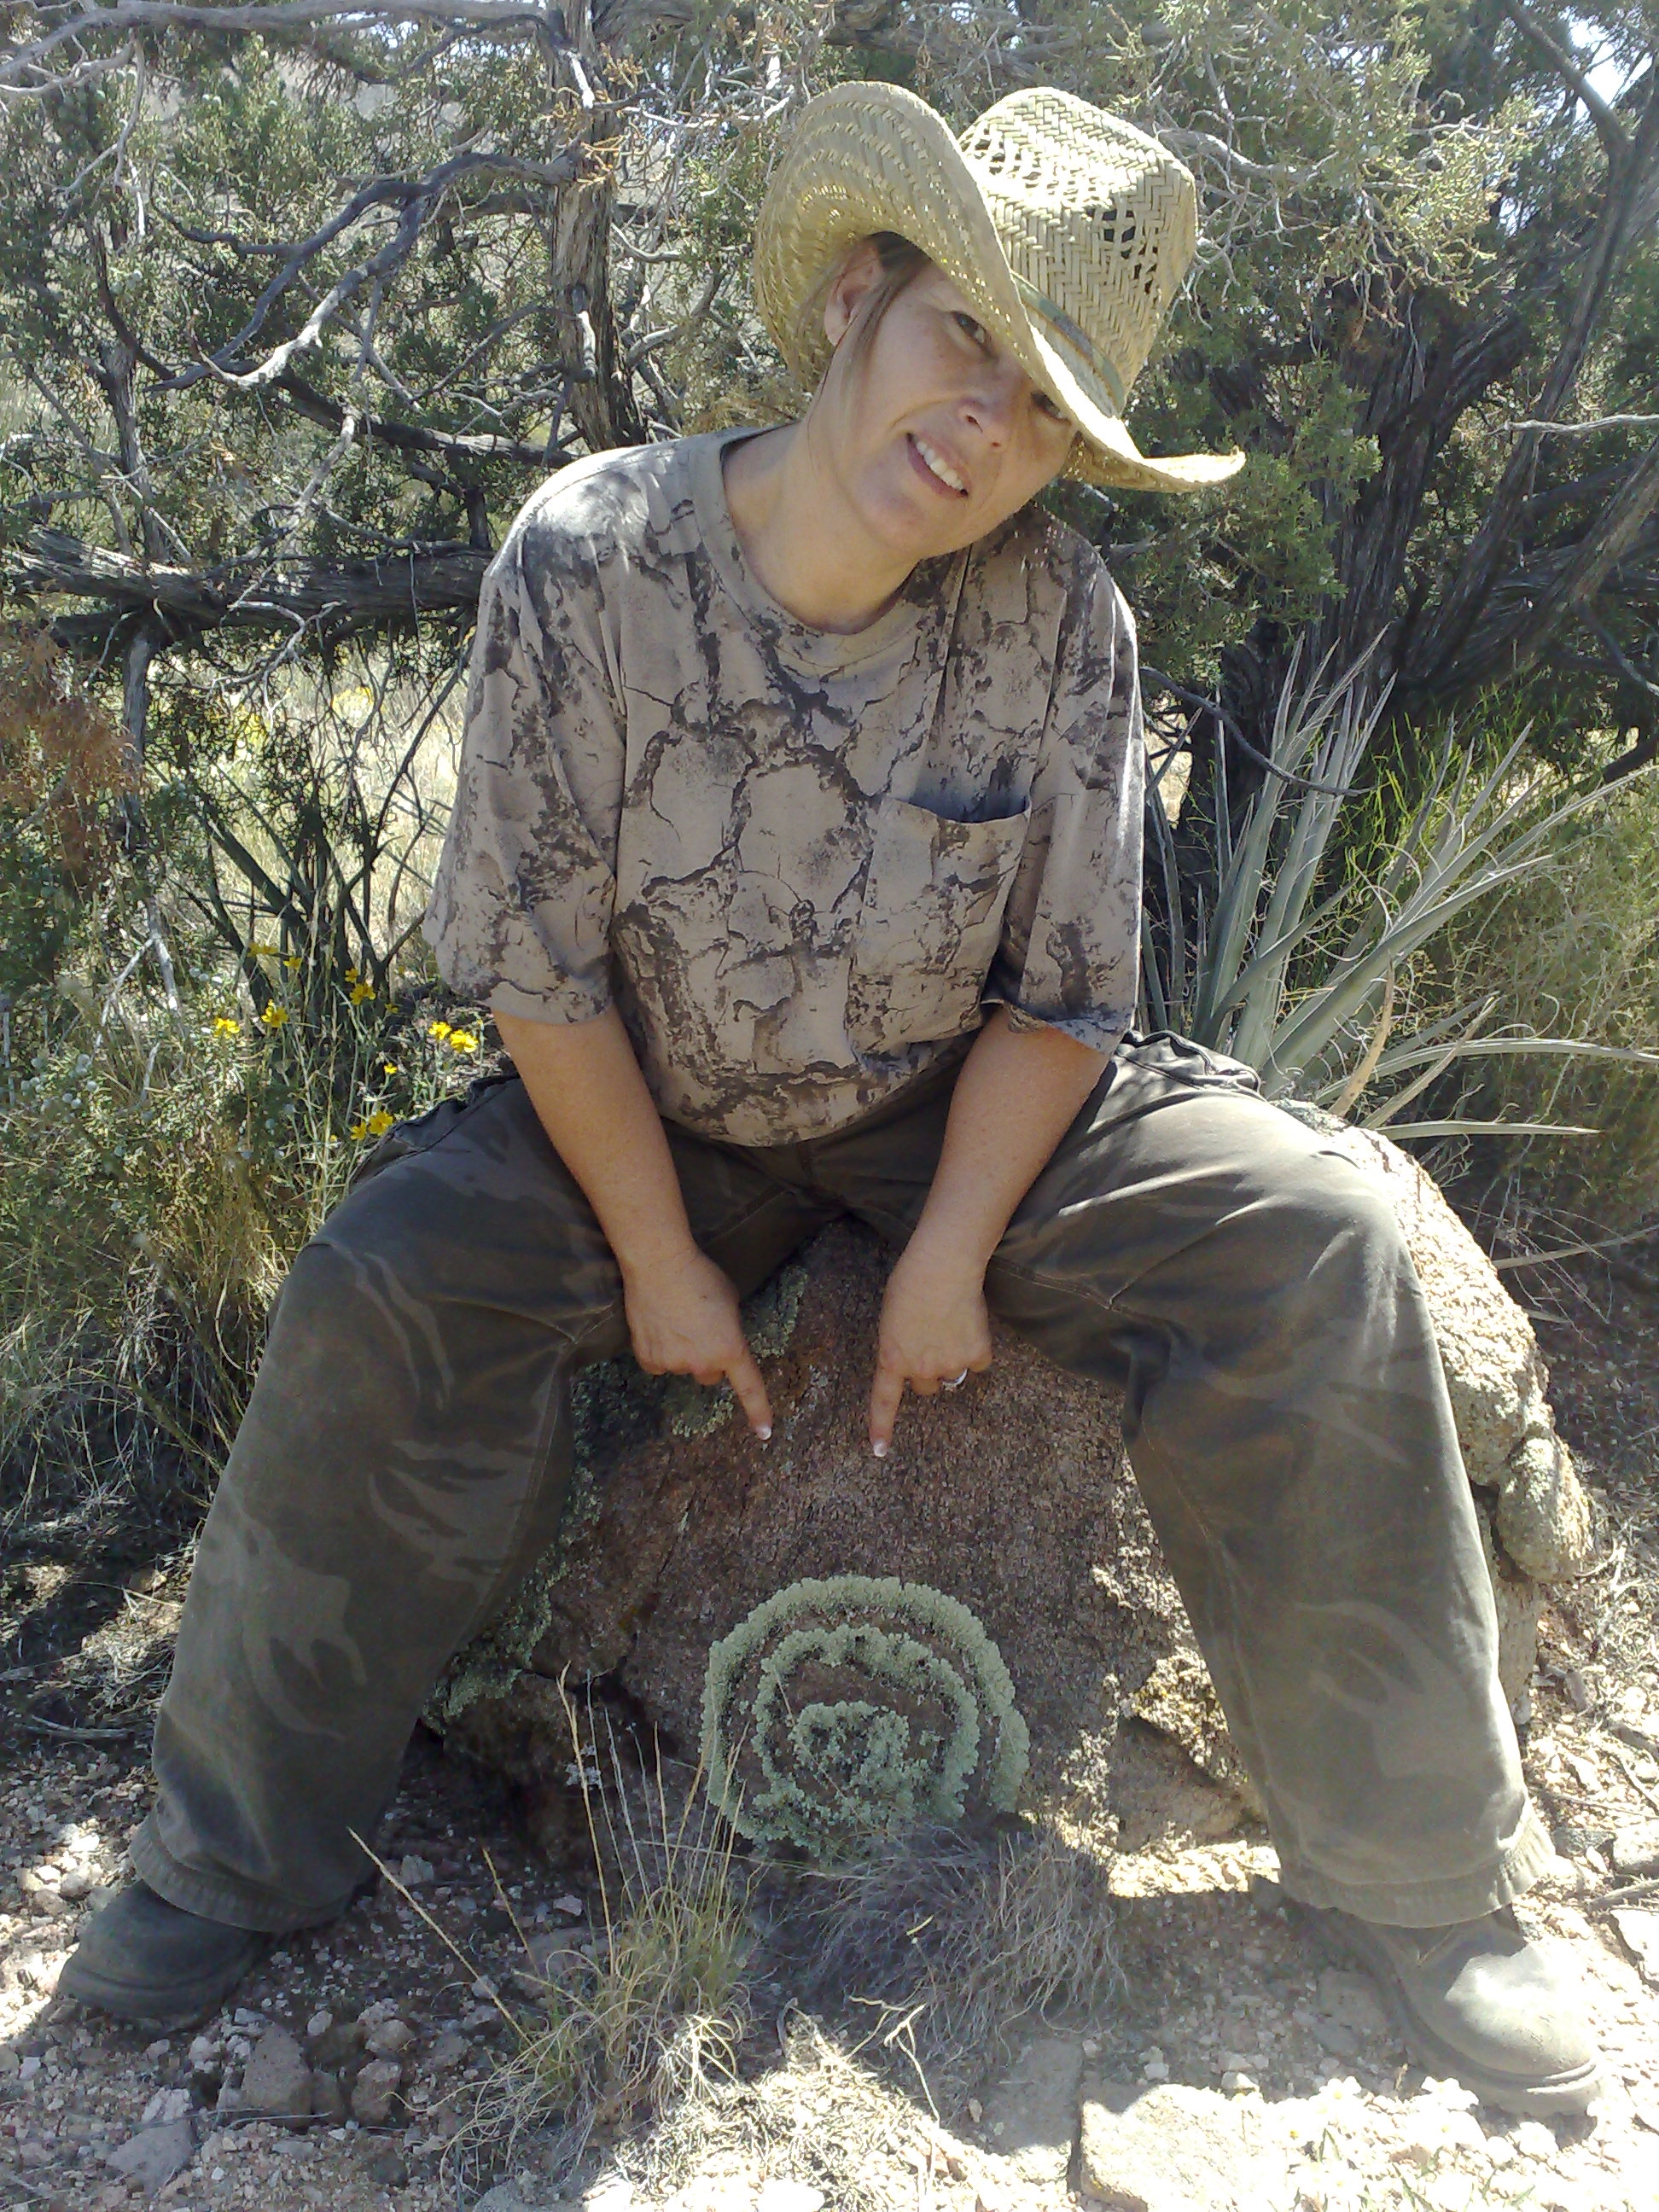 Dana on a rock with interesting lichen growth while her and Keith were out hunting!